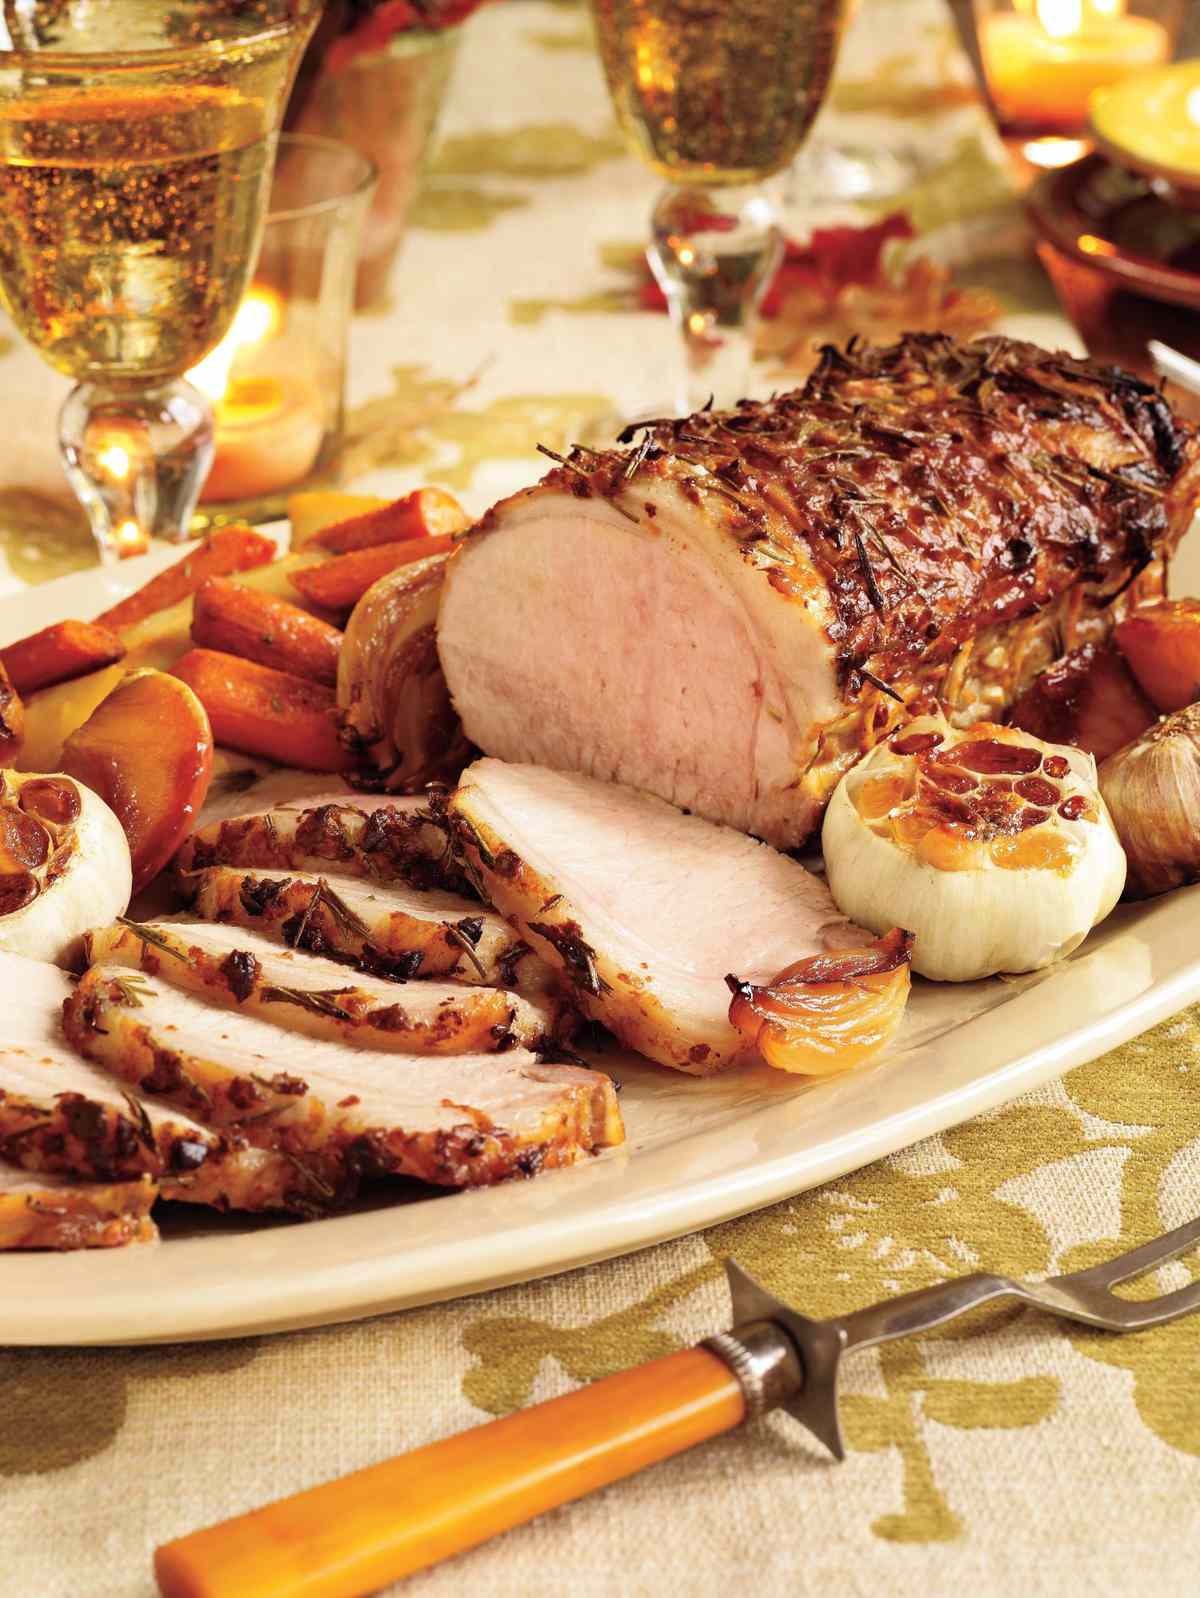 Rosemary-Garlic Pork With Roasted Vegetables and Caramelized Apples